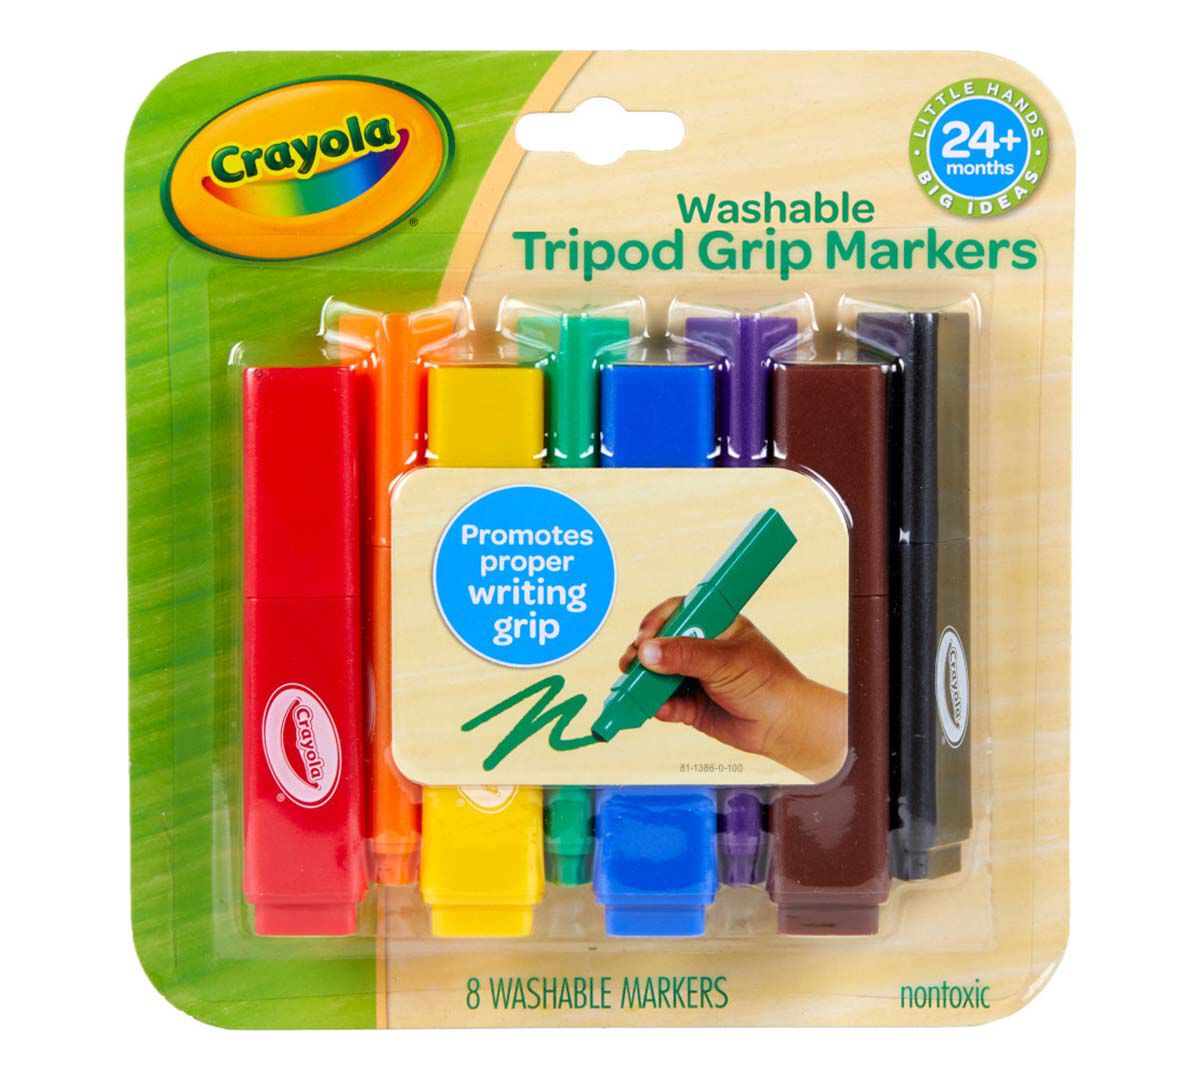 Washable Crayola My First Wash Tripod Grip Markers 4 Gift for Boys and Girls Stocking Stuffers Holiday Gifting Arts and Crafts Kids Easter Gifting for Girls and Boys 5,6 and Up Easter Basket Stuffers Ages 3